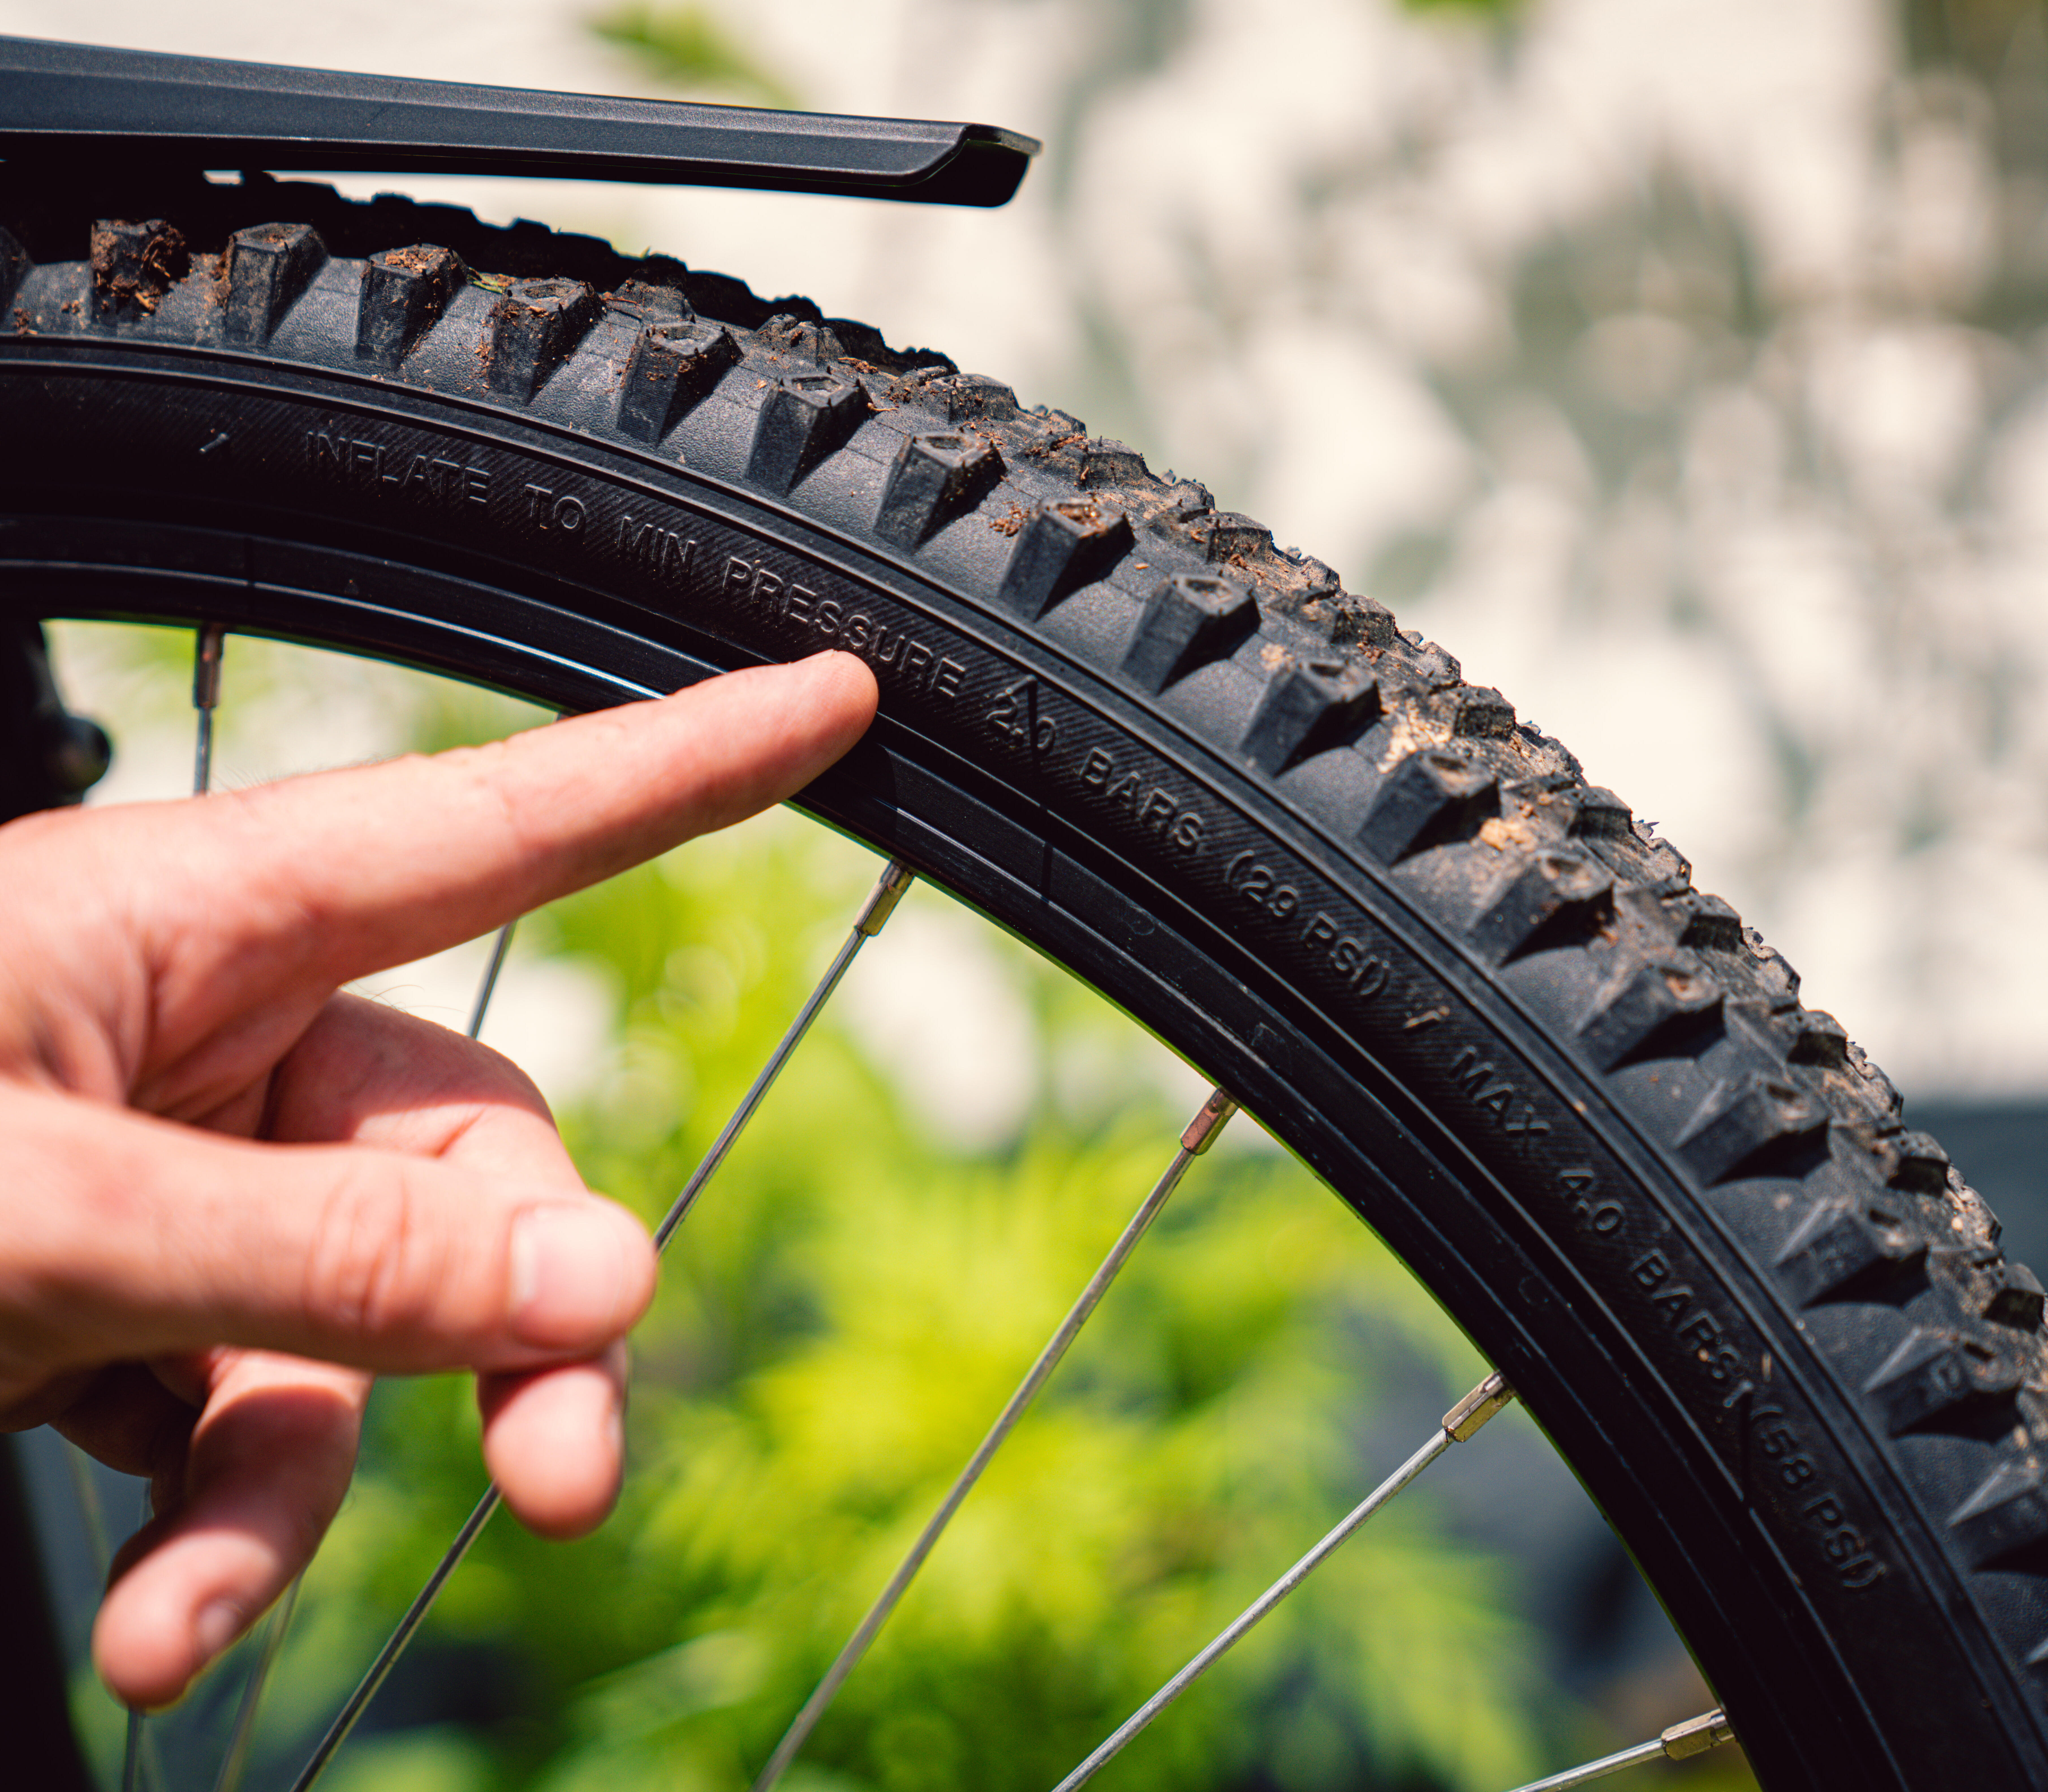 What is the recommended tyre pressure for the 16-inch bmx? 